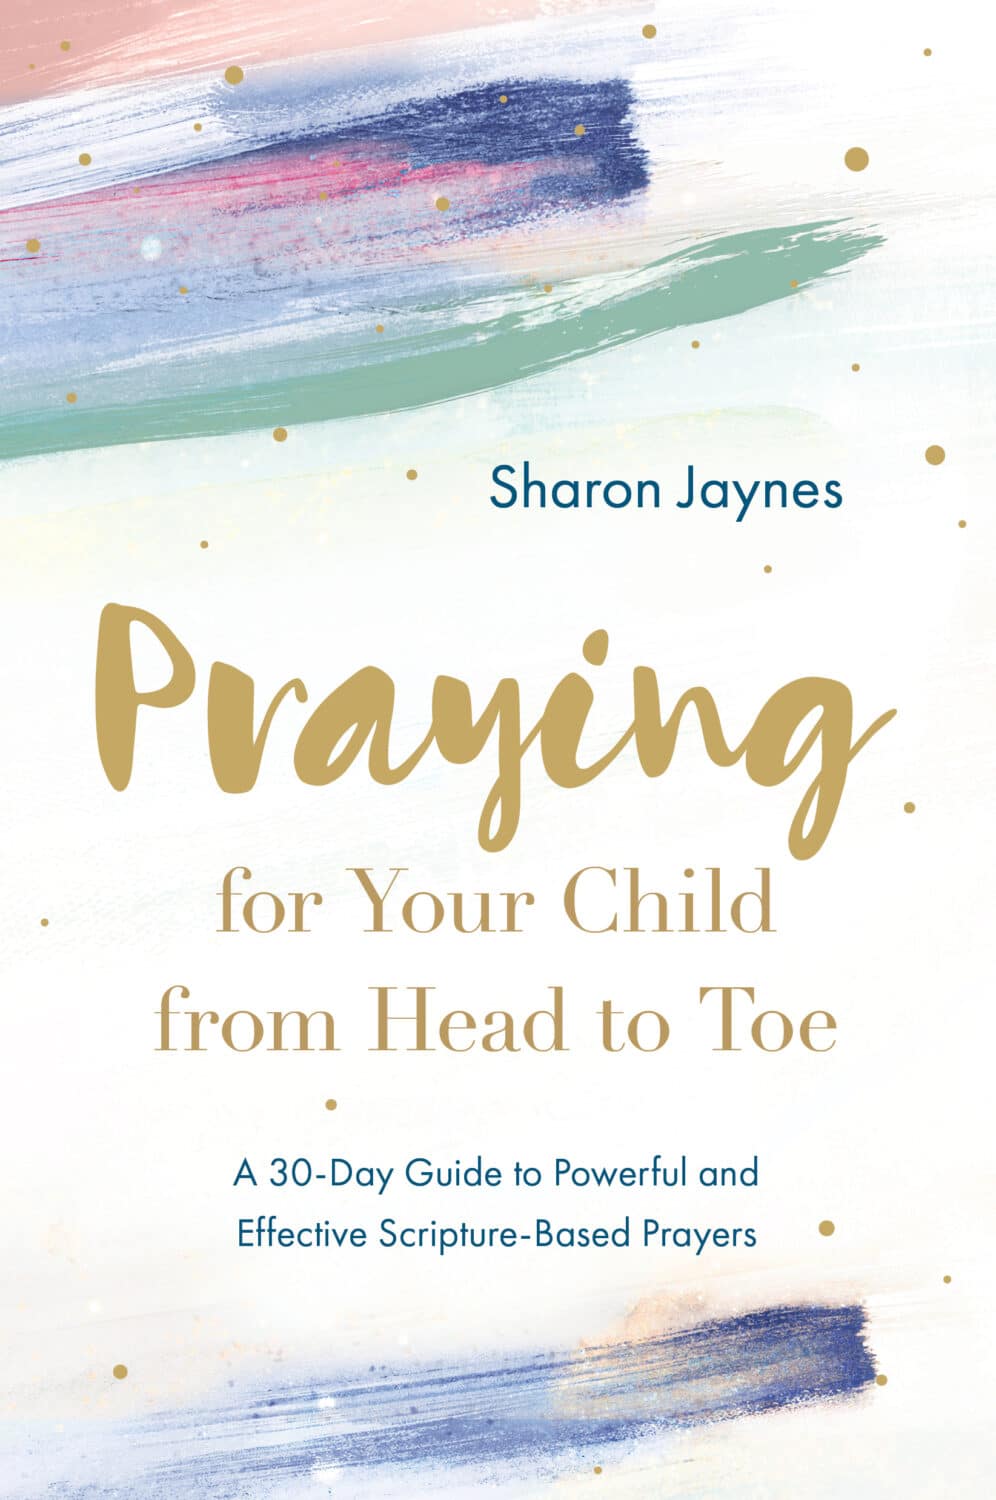 Praying for your child book cover image